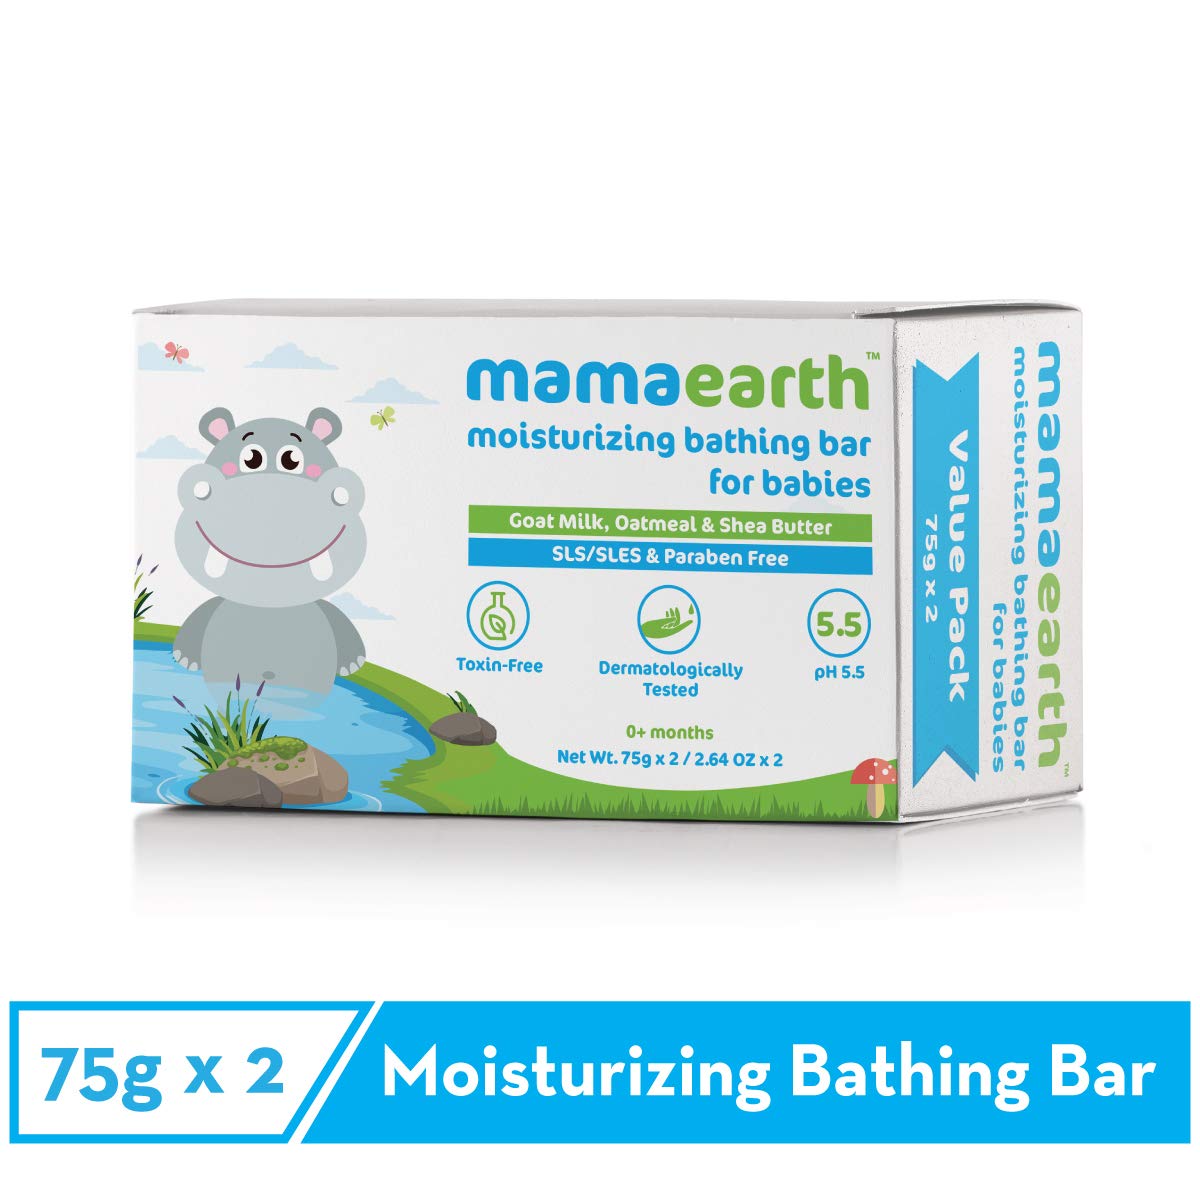 Mamaearth Moisturizing Baby Bathing Soap Bar, pH 5.5, with Goat Milk & Oatmeal. Pack of 2, 75gms Each